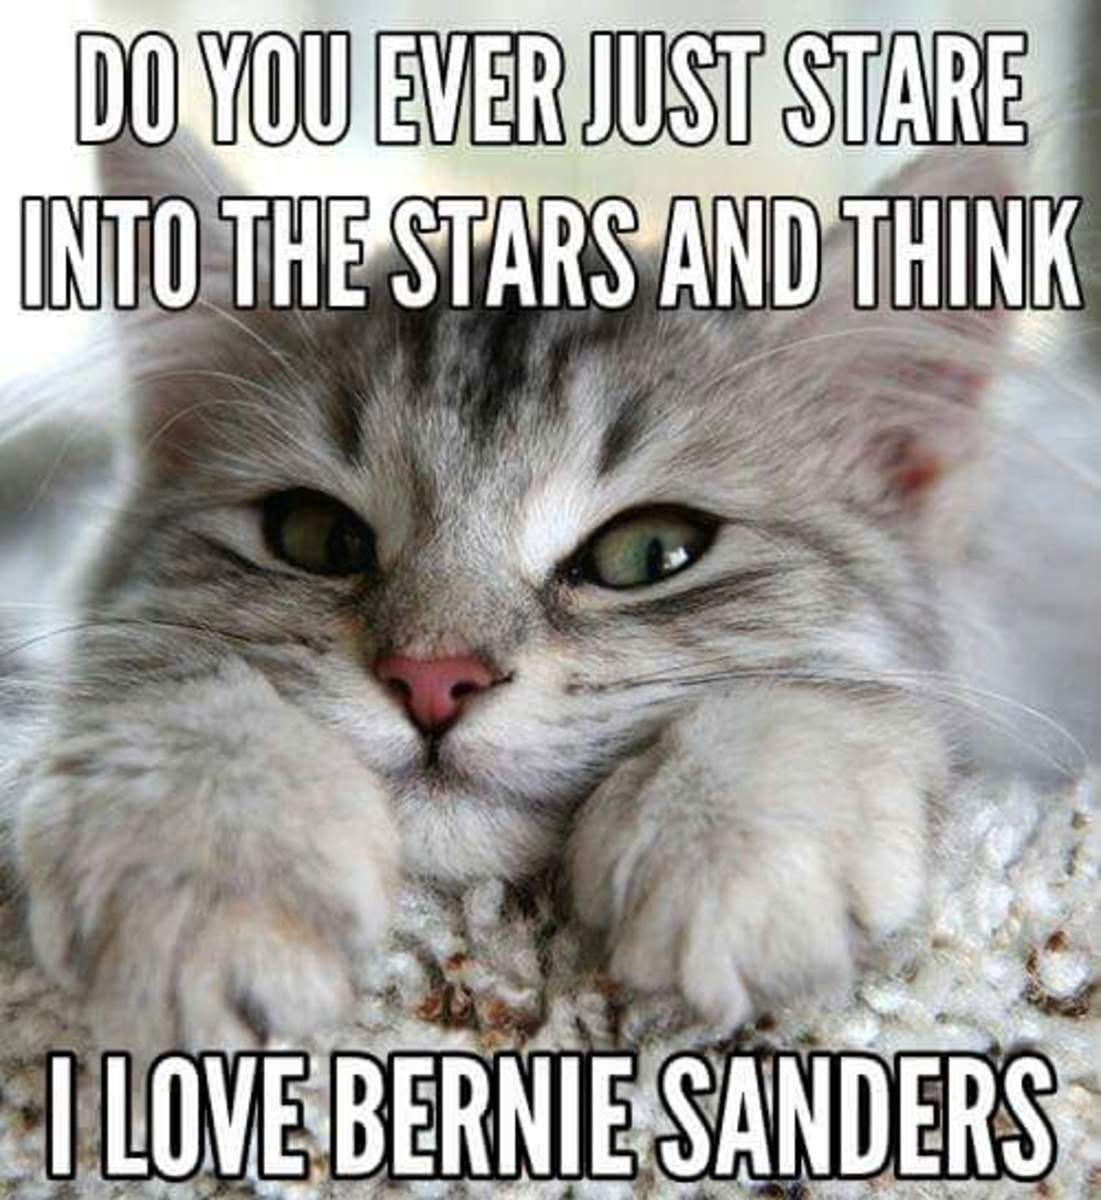 "Do you ever just stare into the stars and think, I love Bernie Sanders."